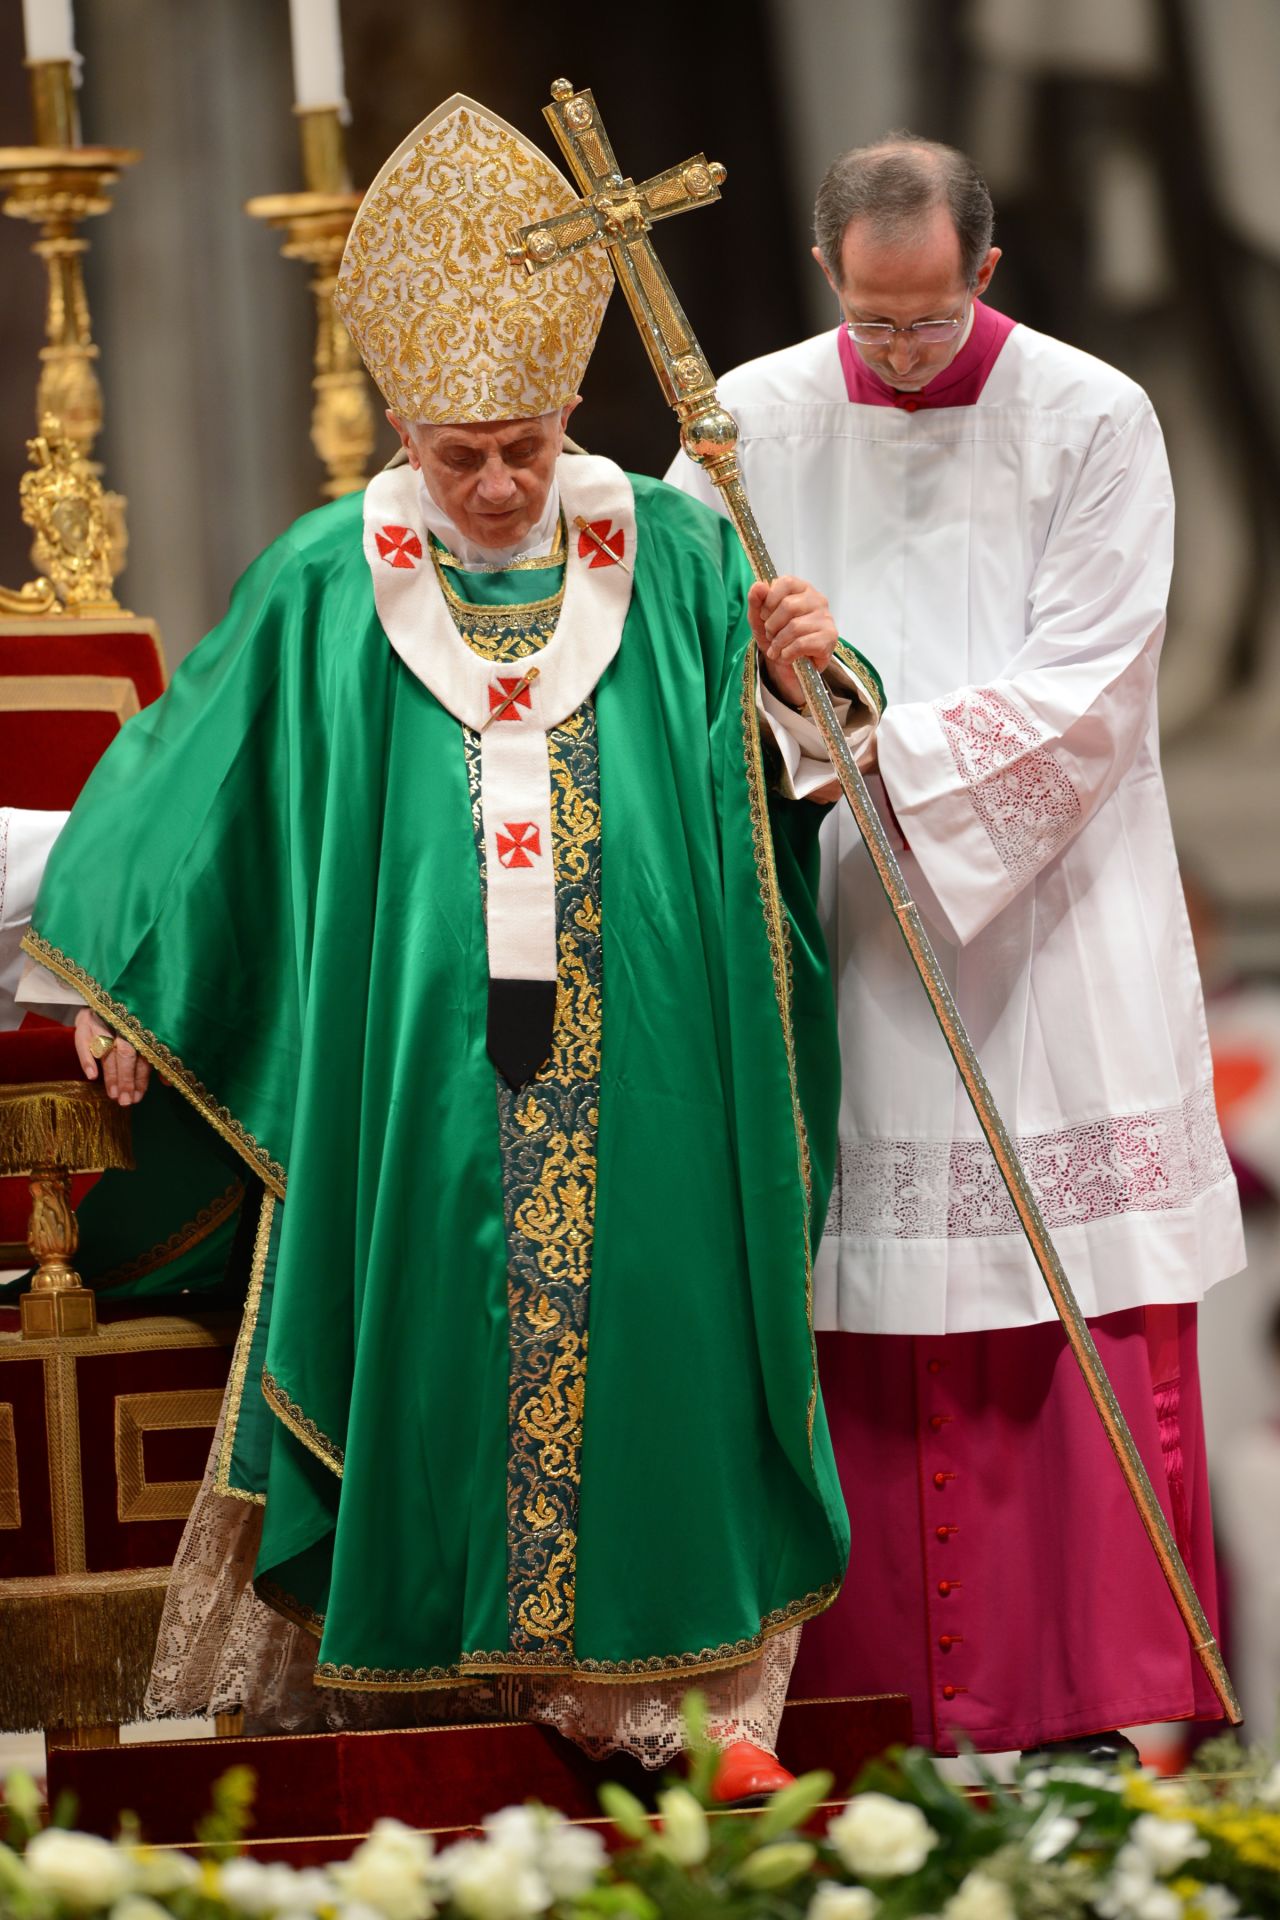 Pope Benedict XVI wears a green chasuble in October, 2012. A chasuble is a liturgical vestment worn by all priests, including the pope, when saying mass, Beck said. There are a few liturgical seasons in the church, he said, each of which is associated with a color of chasuble. Green is the color worn most Sundays, known as "ordinary time," essentially, not during Advent, Lent or Easter.